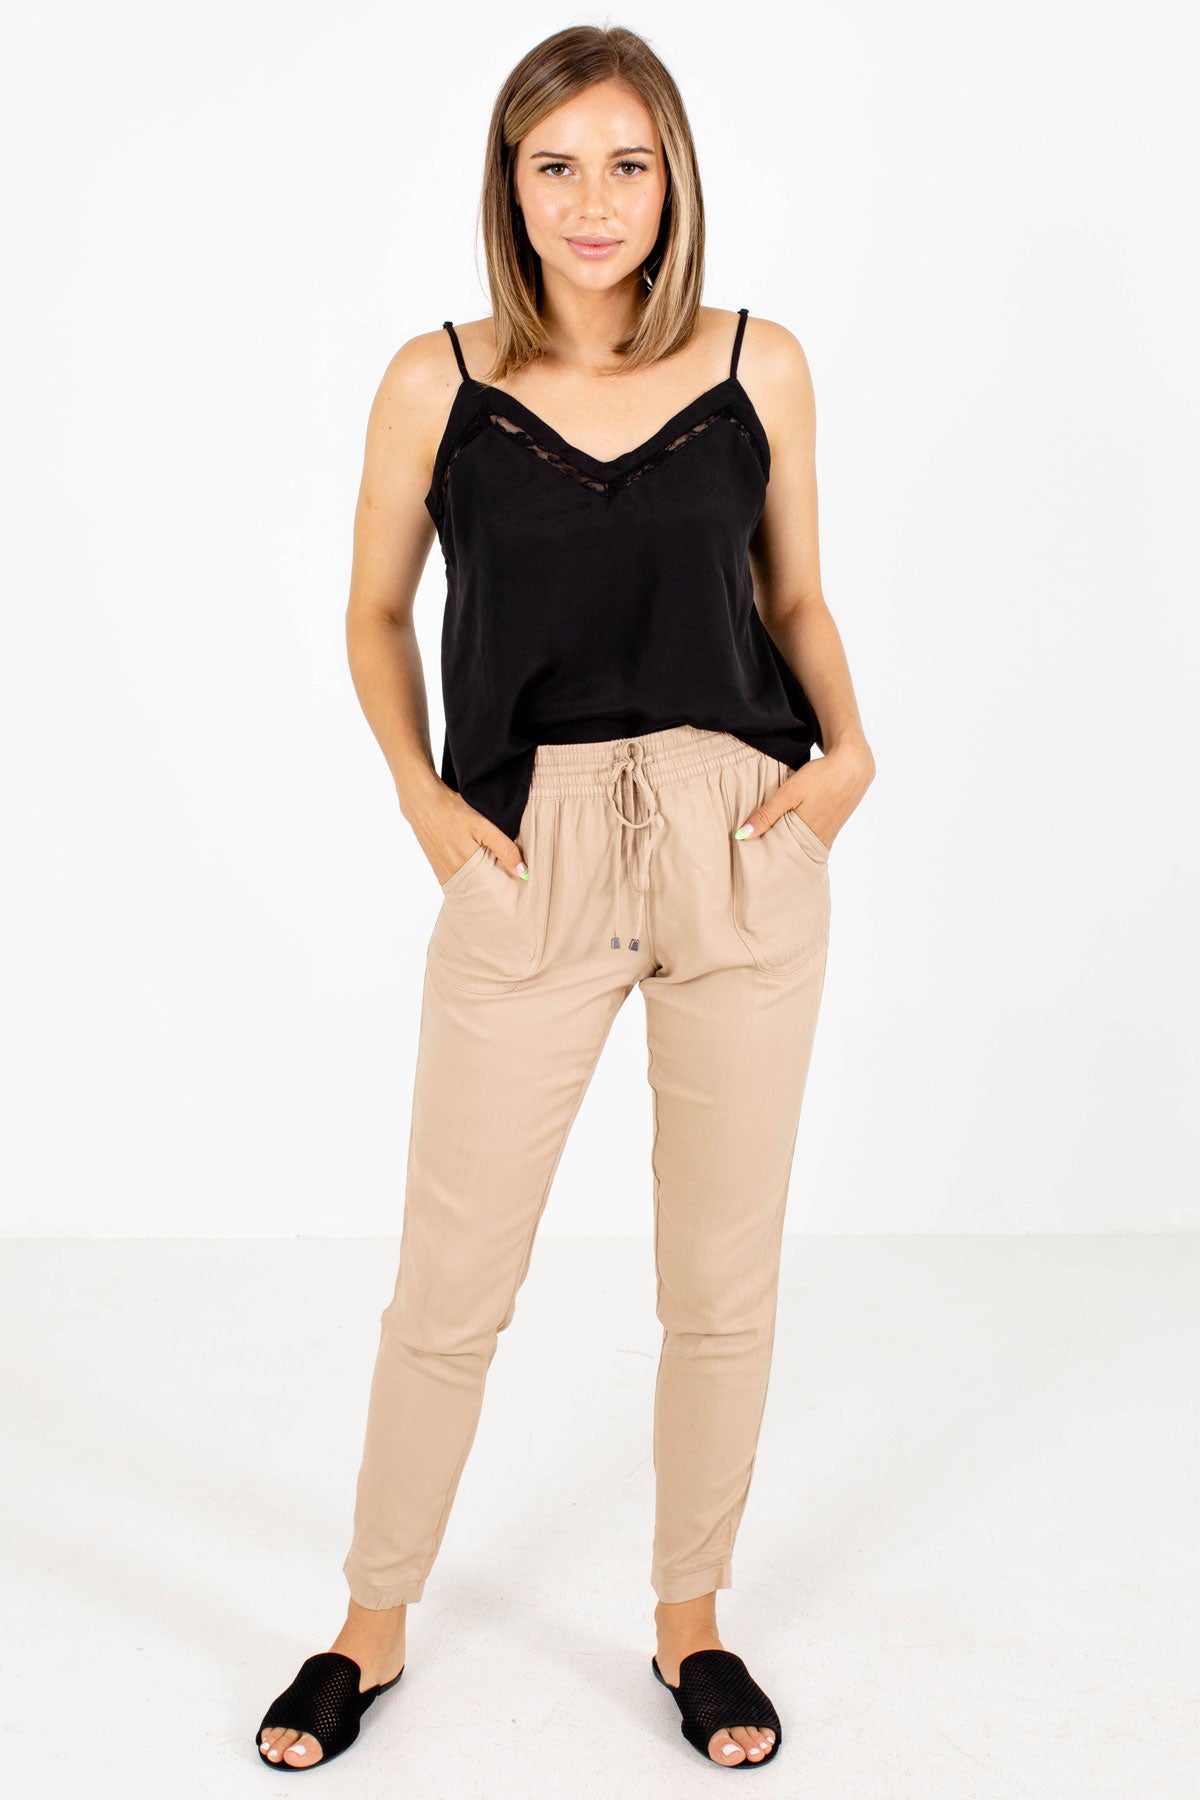 Women's Taupe Spring and Summertime Boutique Clothing